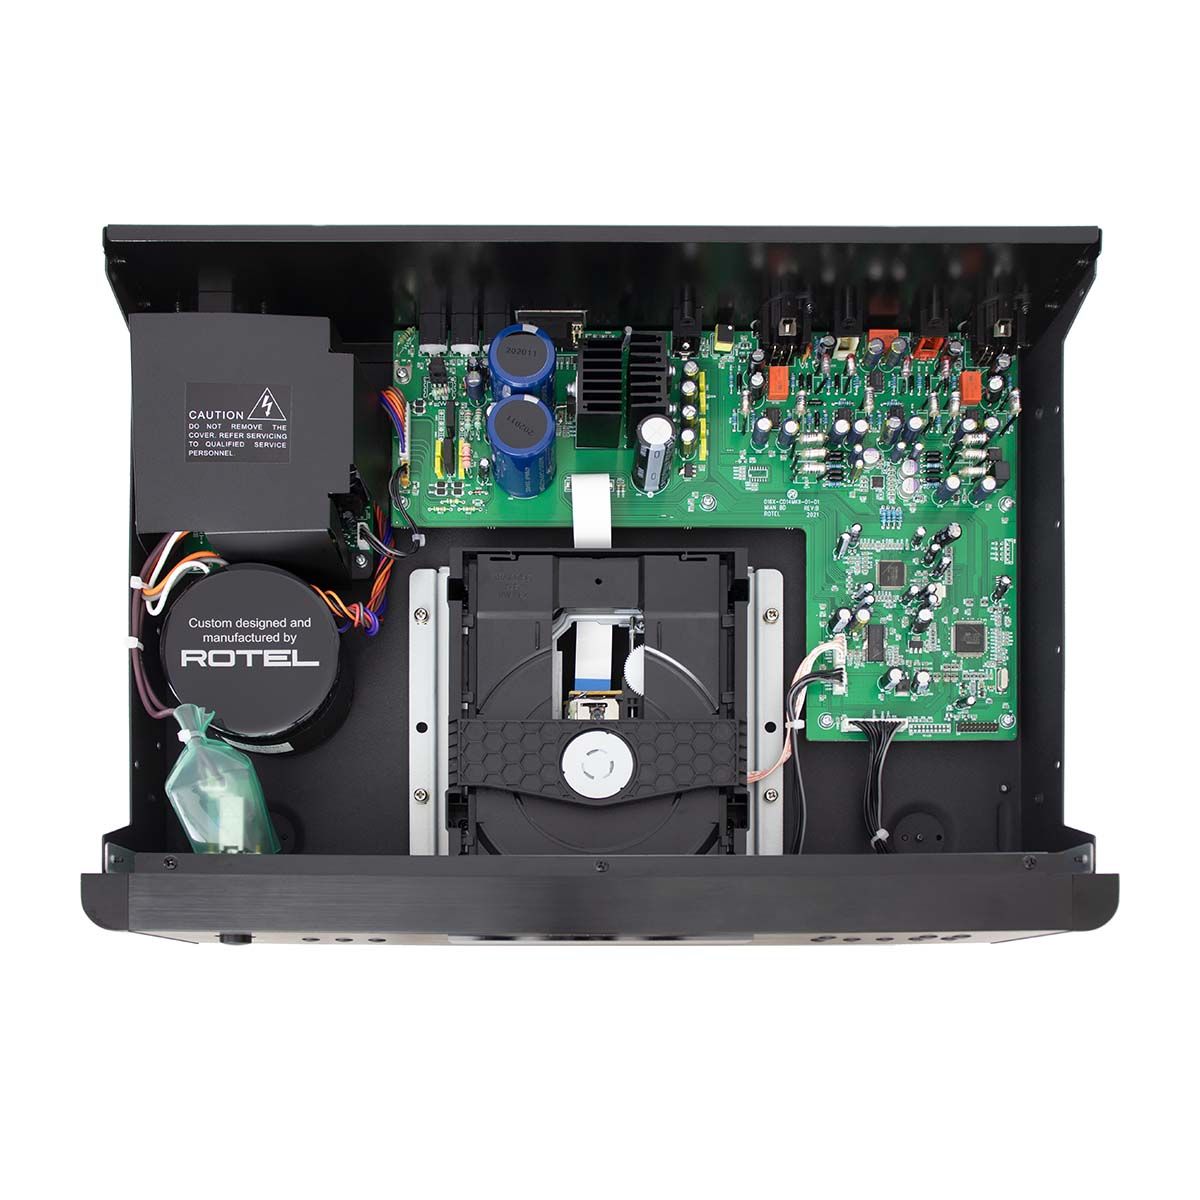 Rotel RCD-1572 MKII CD Player, Black, top view with internal components exposed